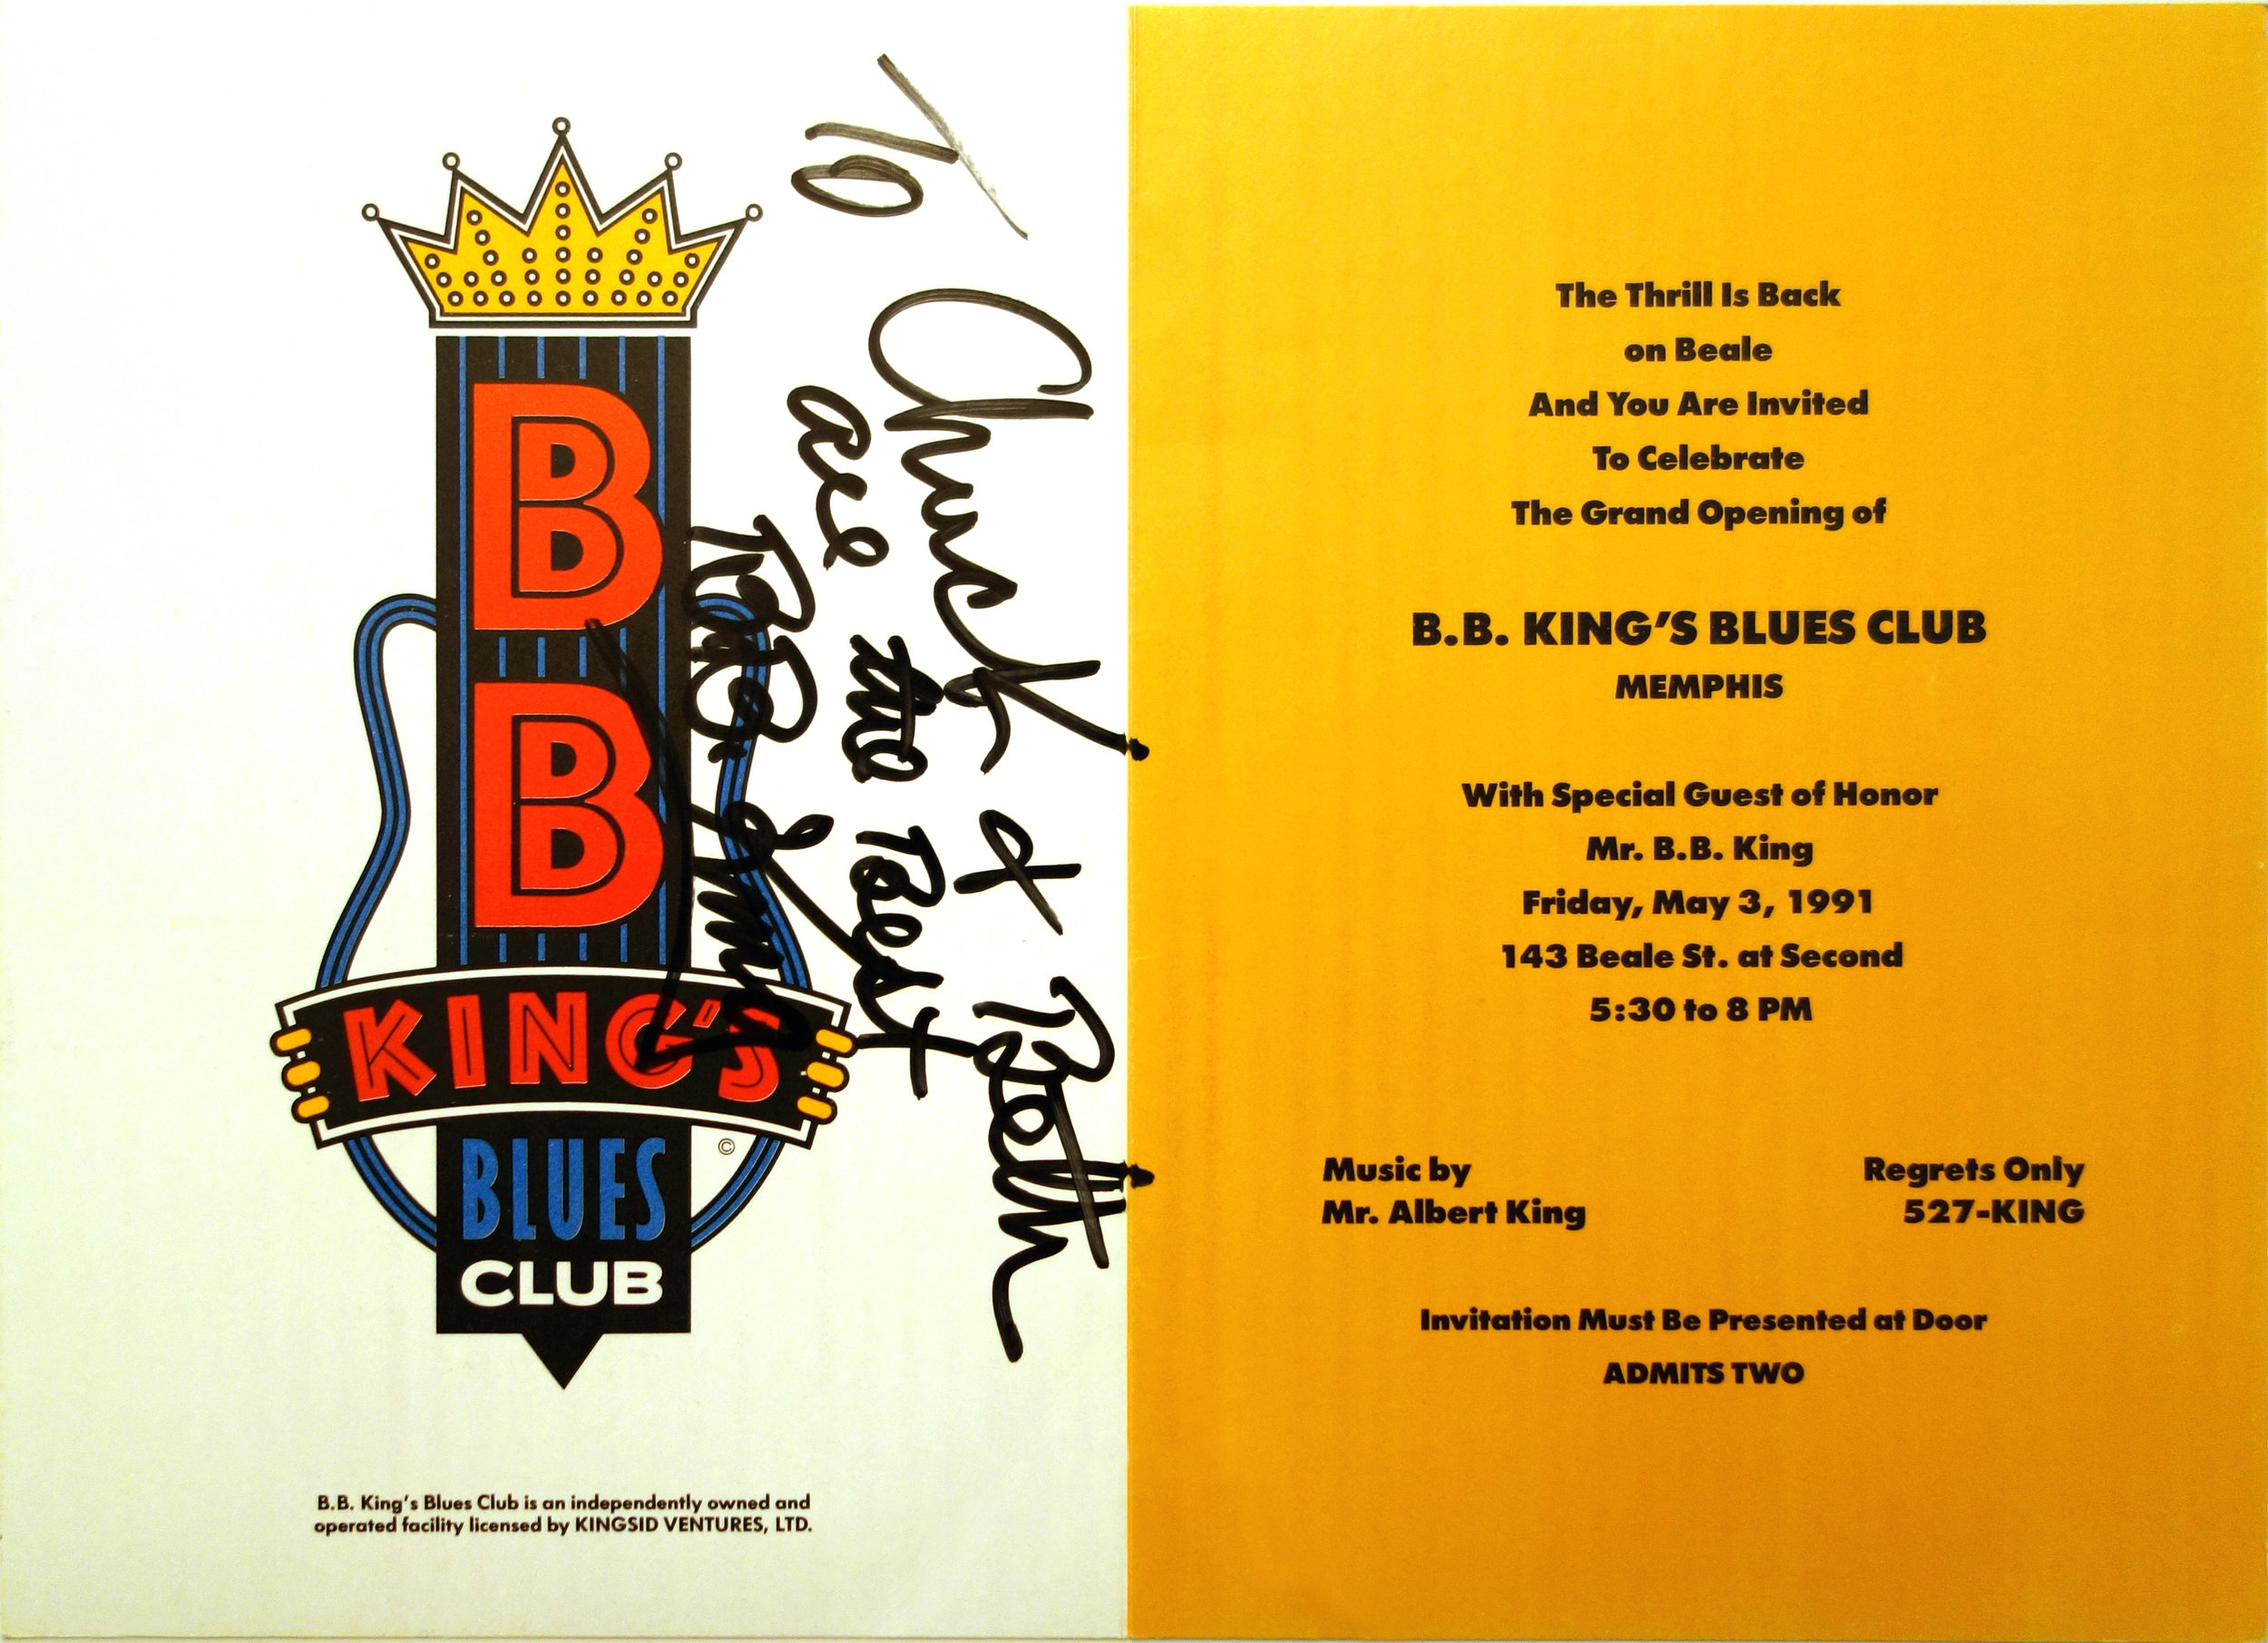  The Thrill is Back!  BB King’s Blues Club opening invitation  Branding creative, copywriting and design by Chuck Mitchell  Beale Street Memphis, TN 